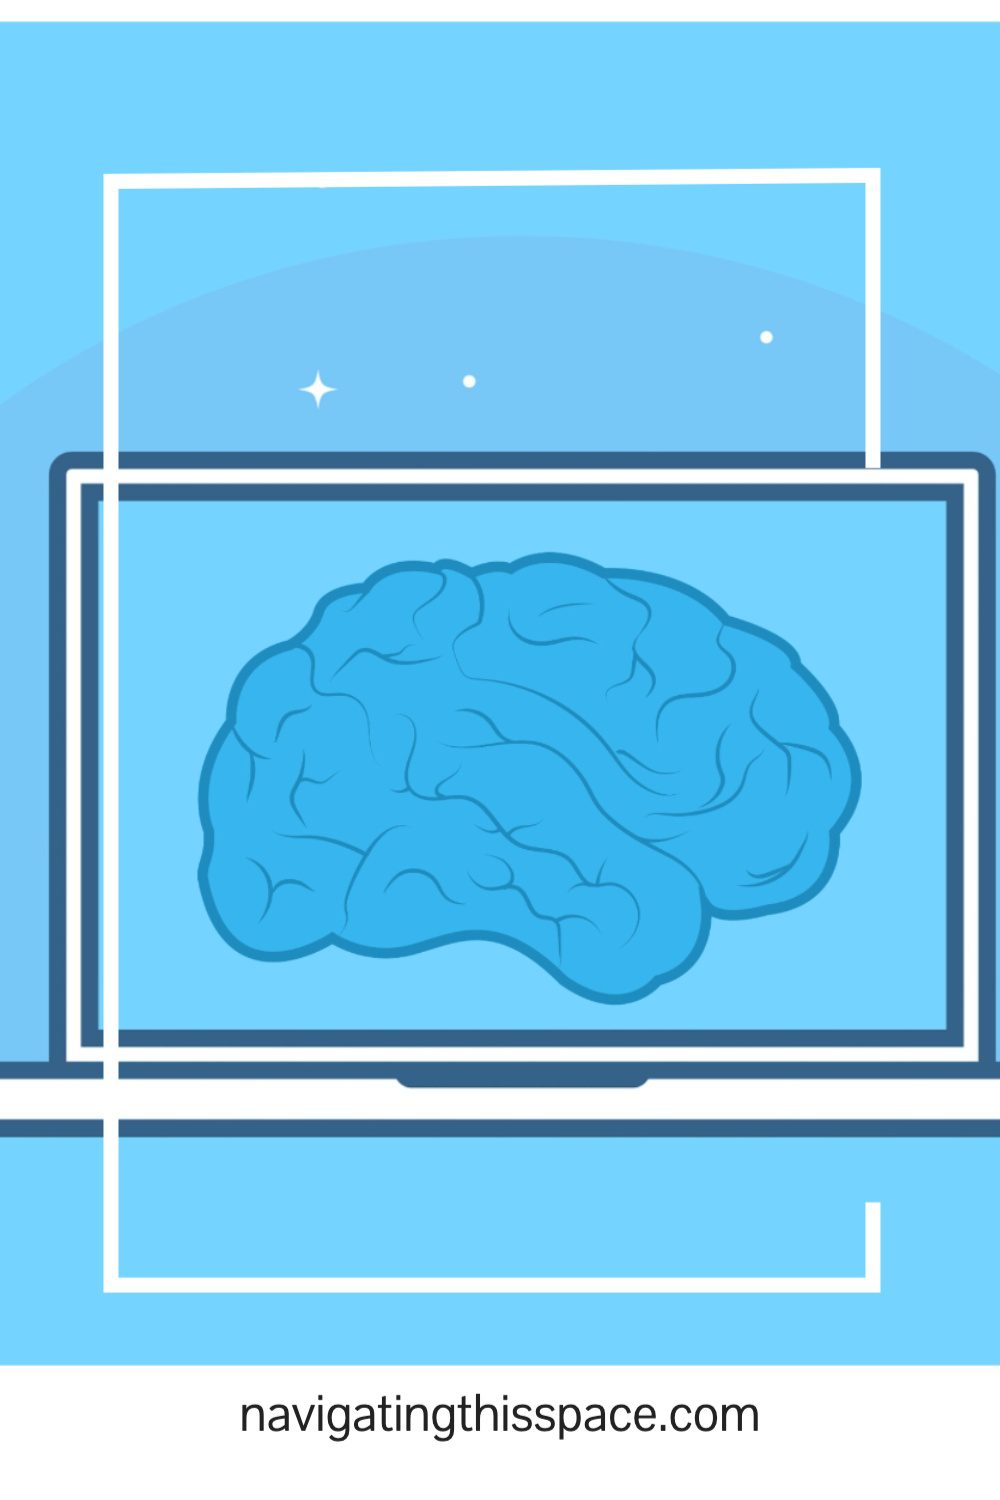 an illustration of the human brain on a computer screen